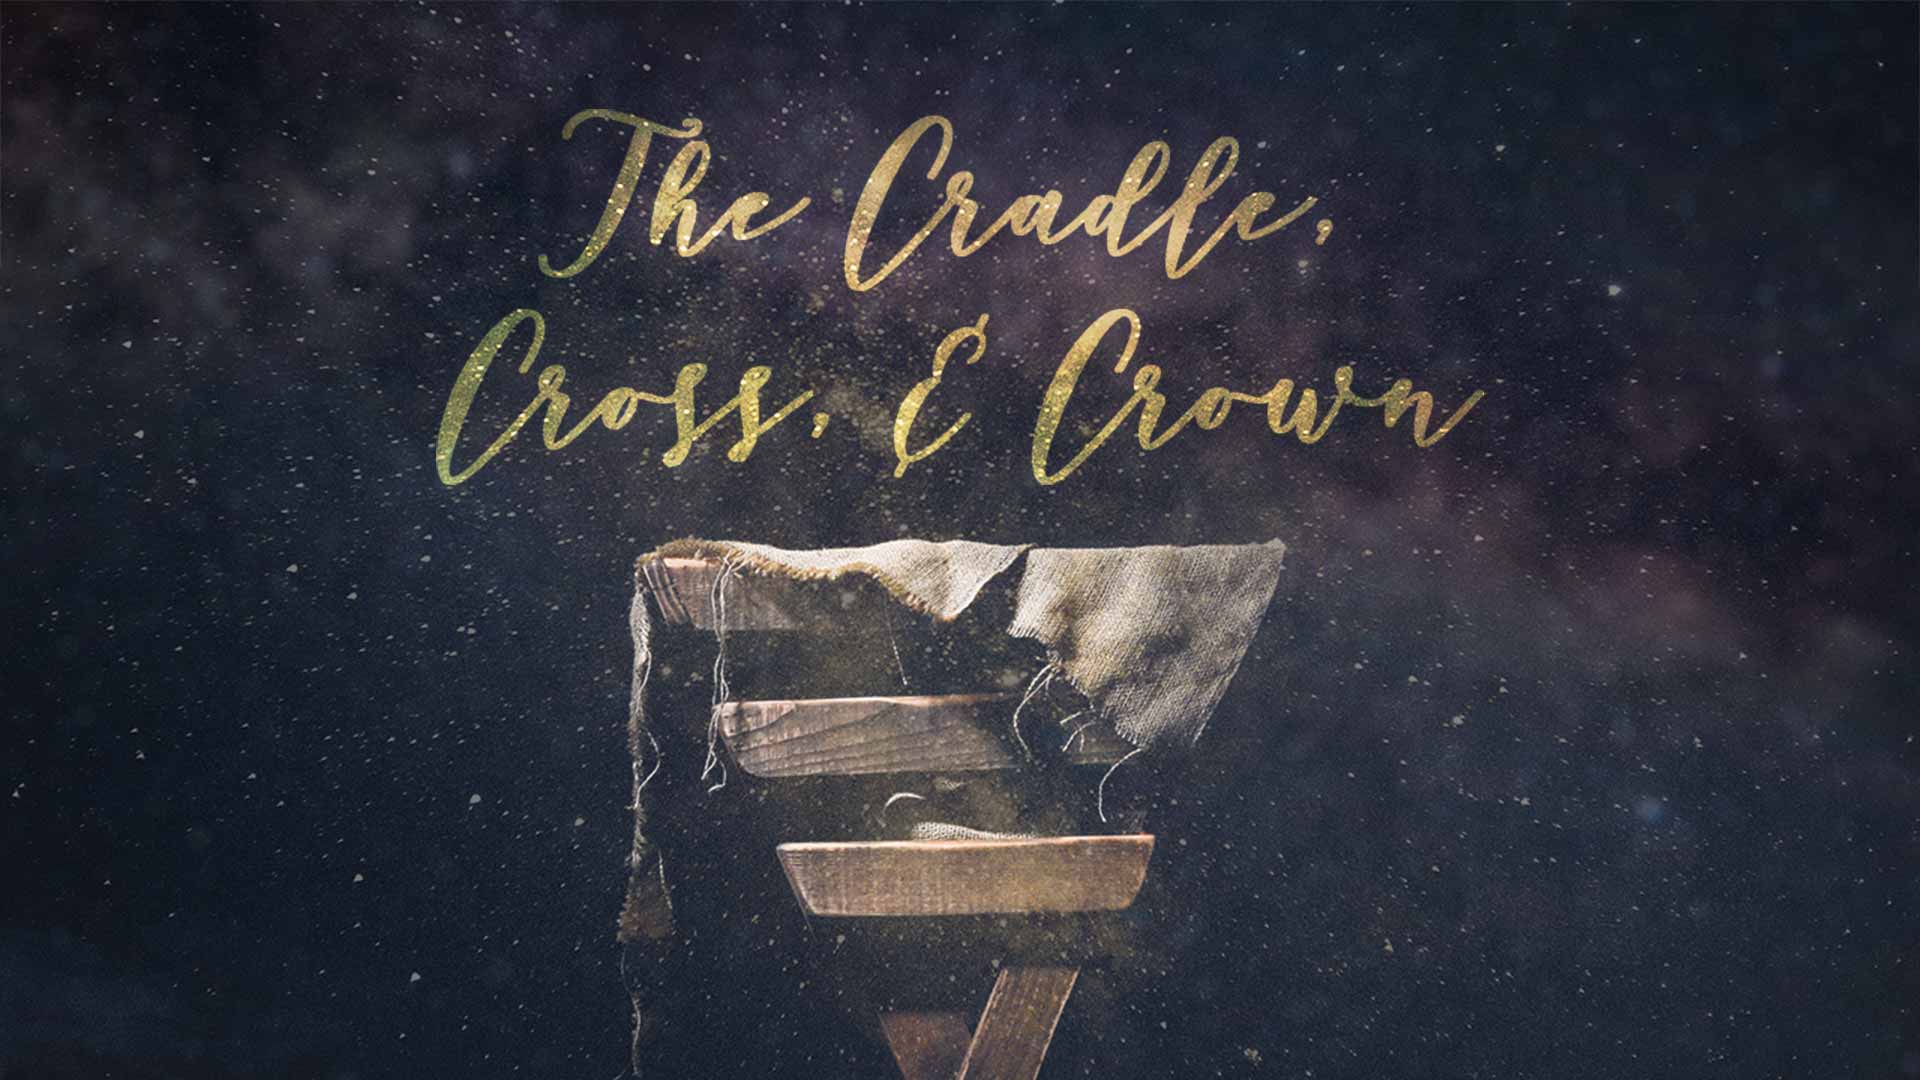 The Cradle Cross and Crown